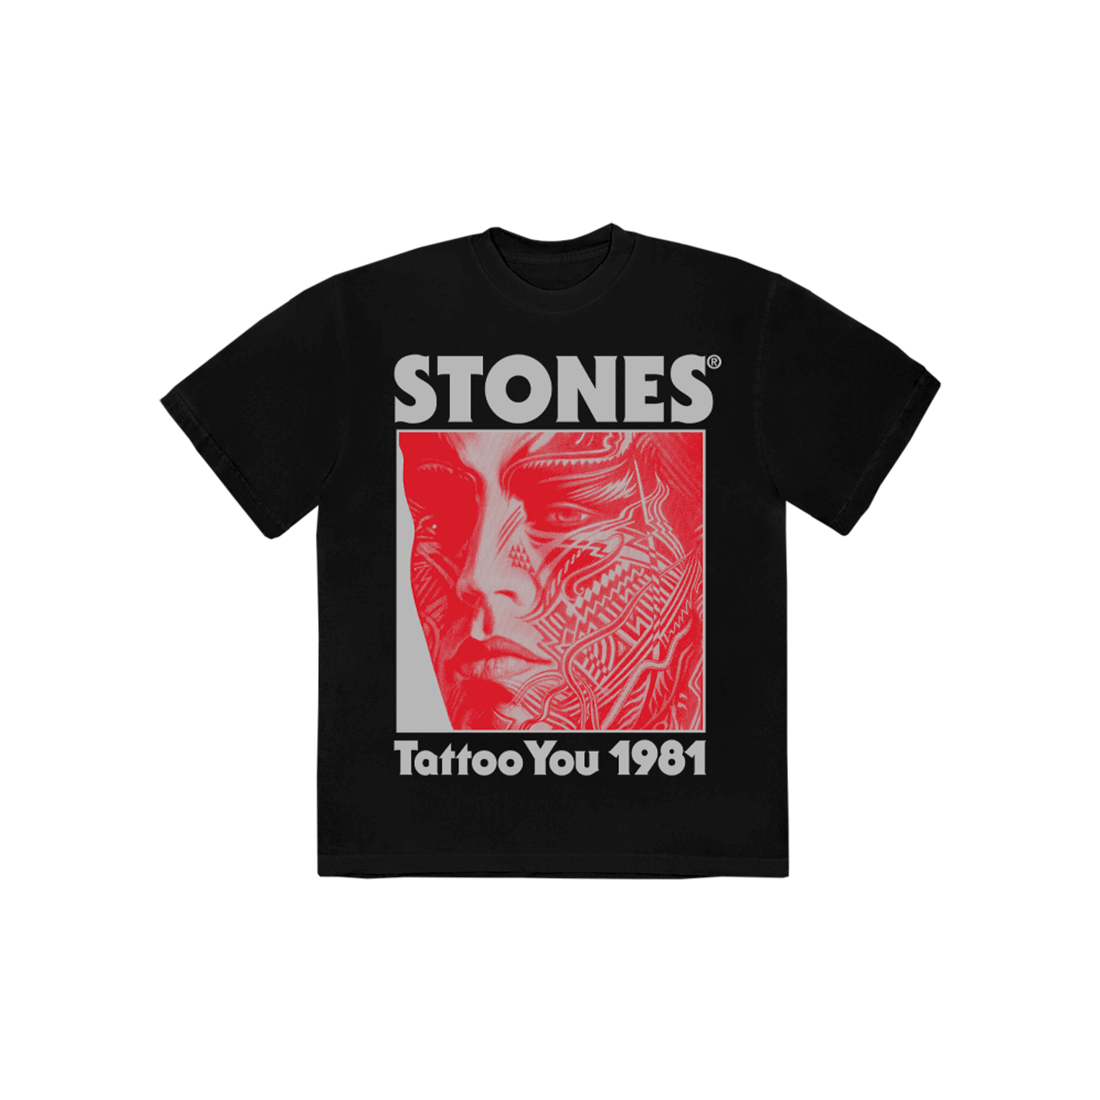 https://images.bravado.de/prod/product-assets/product-asset-data/rolling-stones-the/the-rolling-stones/products/138472/web/302946/image-thumb__302946__3000x3000_original/The-Rolling-Stones-Tattoo-You-40th-Anniversary-Remastered-Deluxe-CD-Black-Shirt-CD-Bundle-zu-bundeln-138472-302946.e36cf55b.png